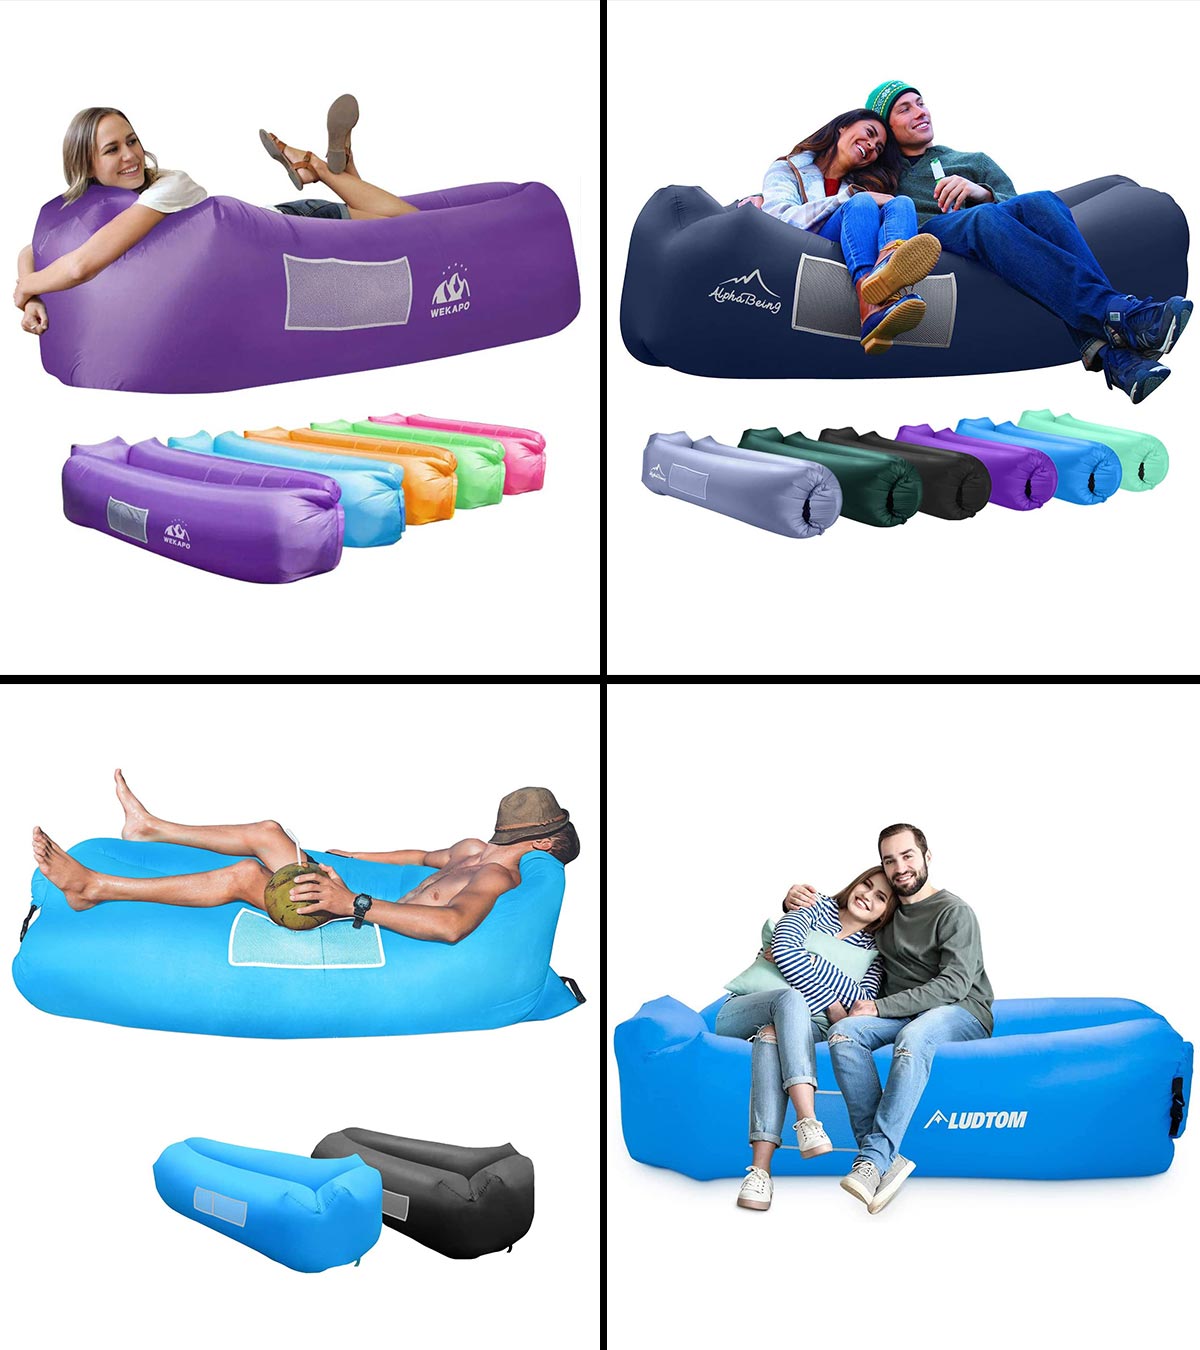 ORSEN Inflatable Lounger Portable Hammock Air Sofa with Water Proof,Anti-Air Leaking Design,Ideal Inflatable Couch and Beach Chair Camping Accessories for Parties Picnic&Festival 